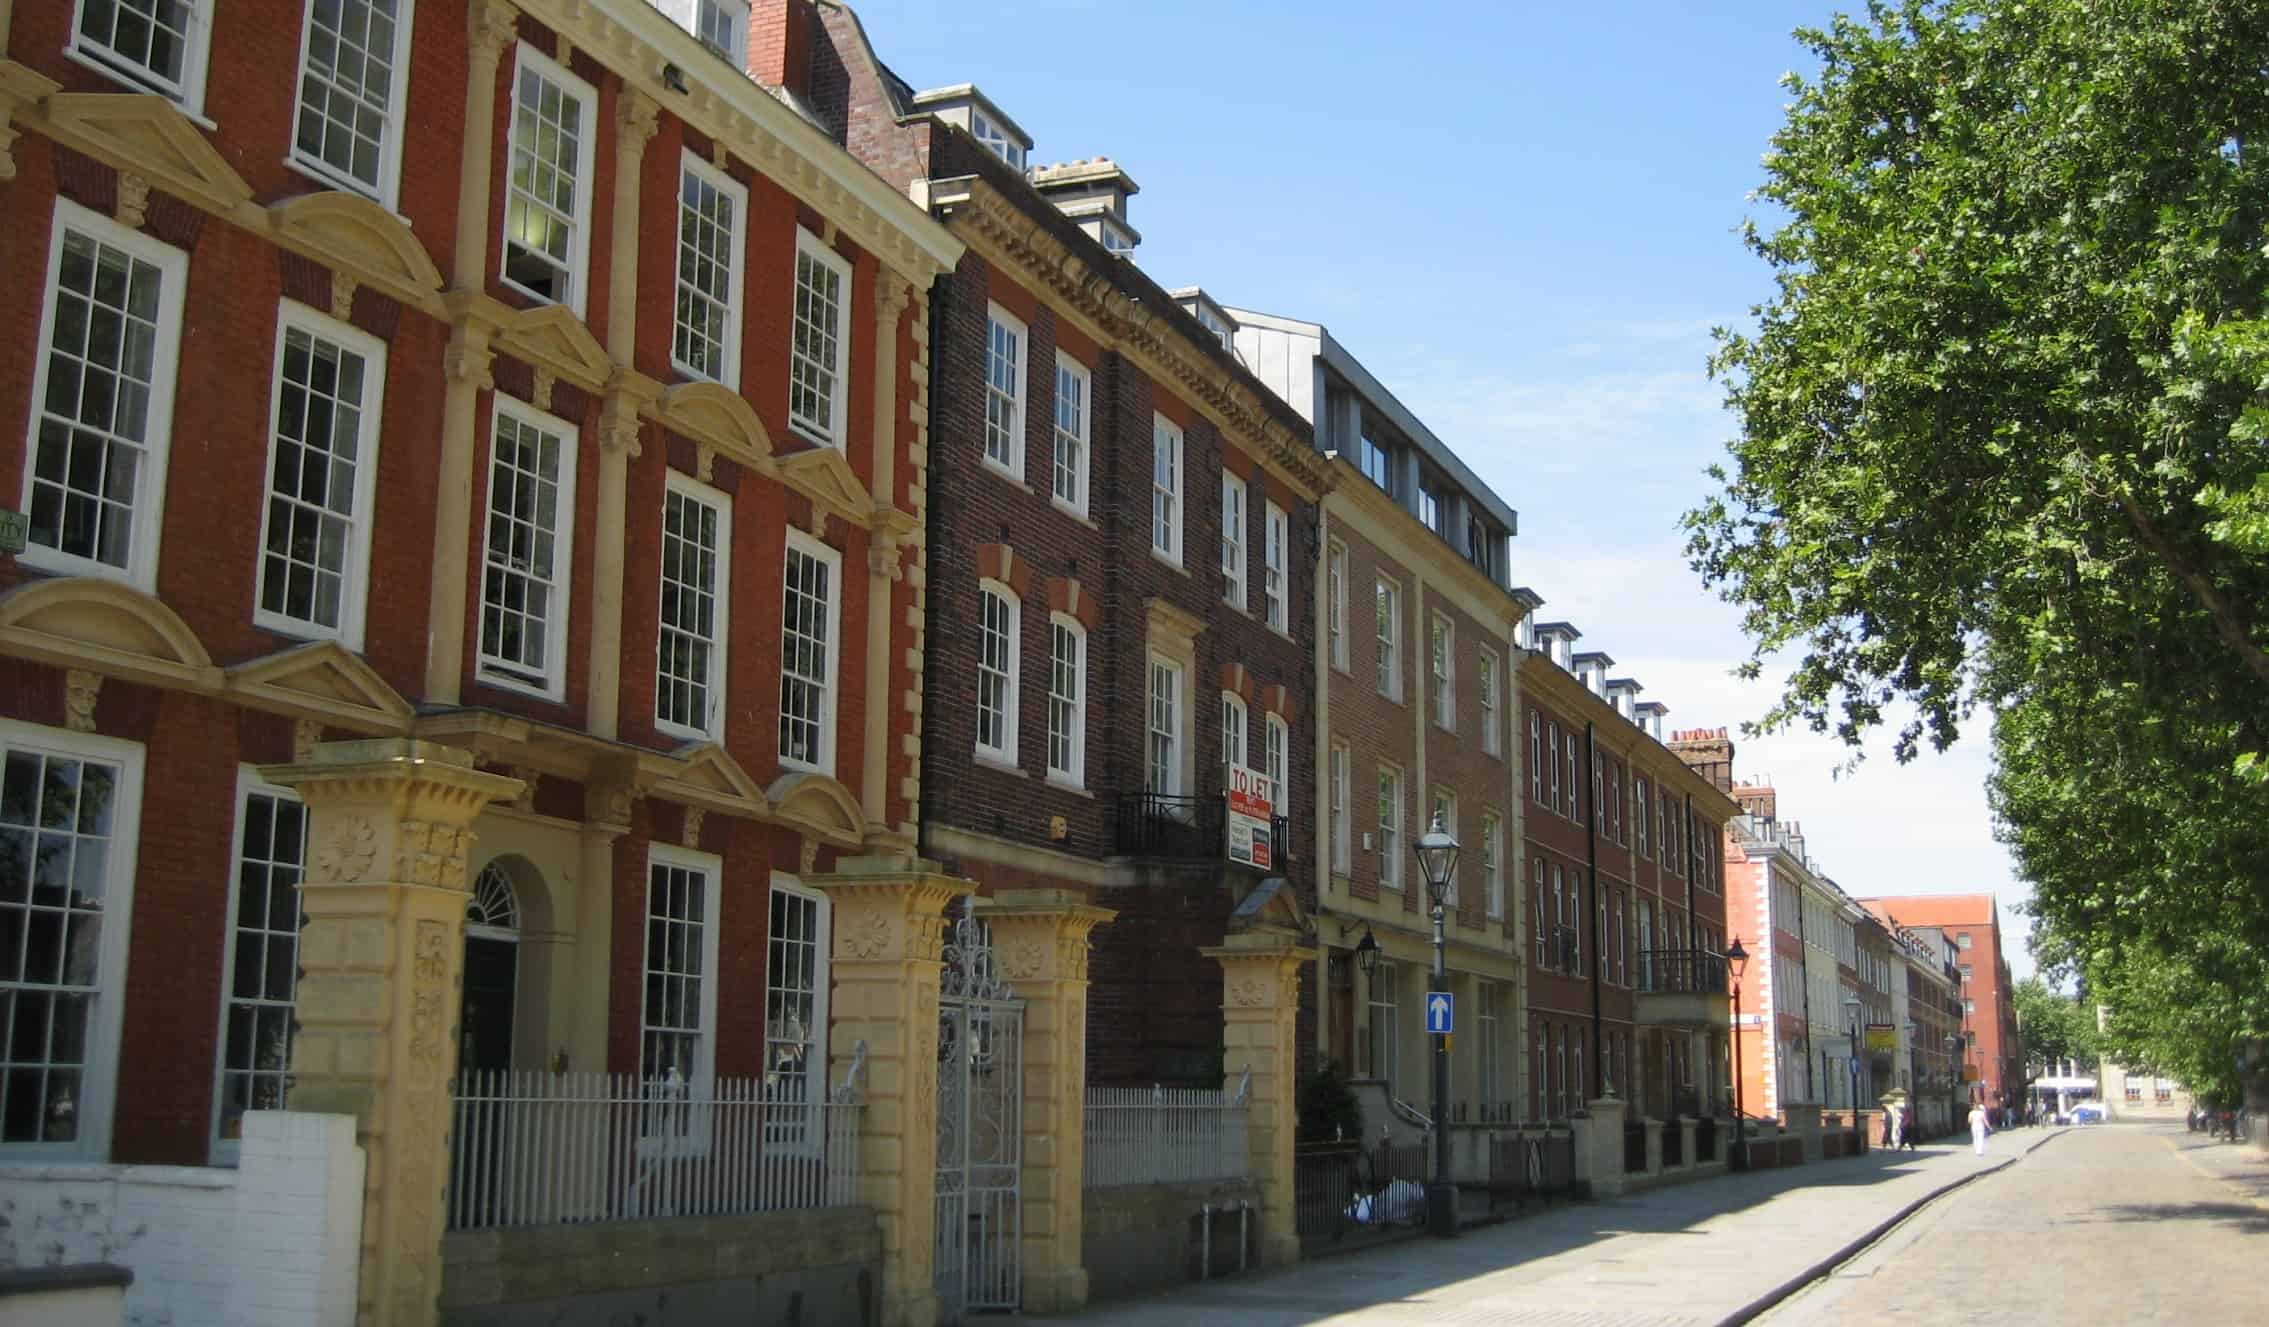 A row of historic brick townhouses on a cobblestone street in Bristol, UK